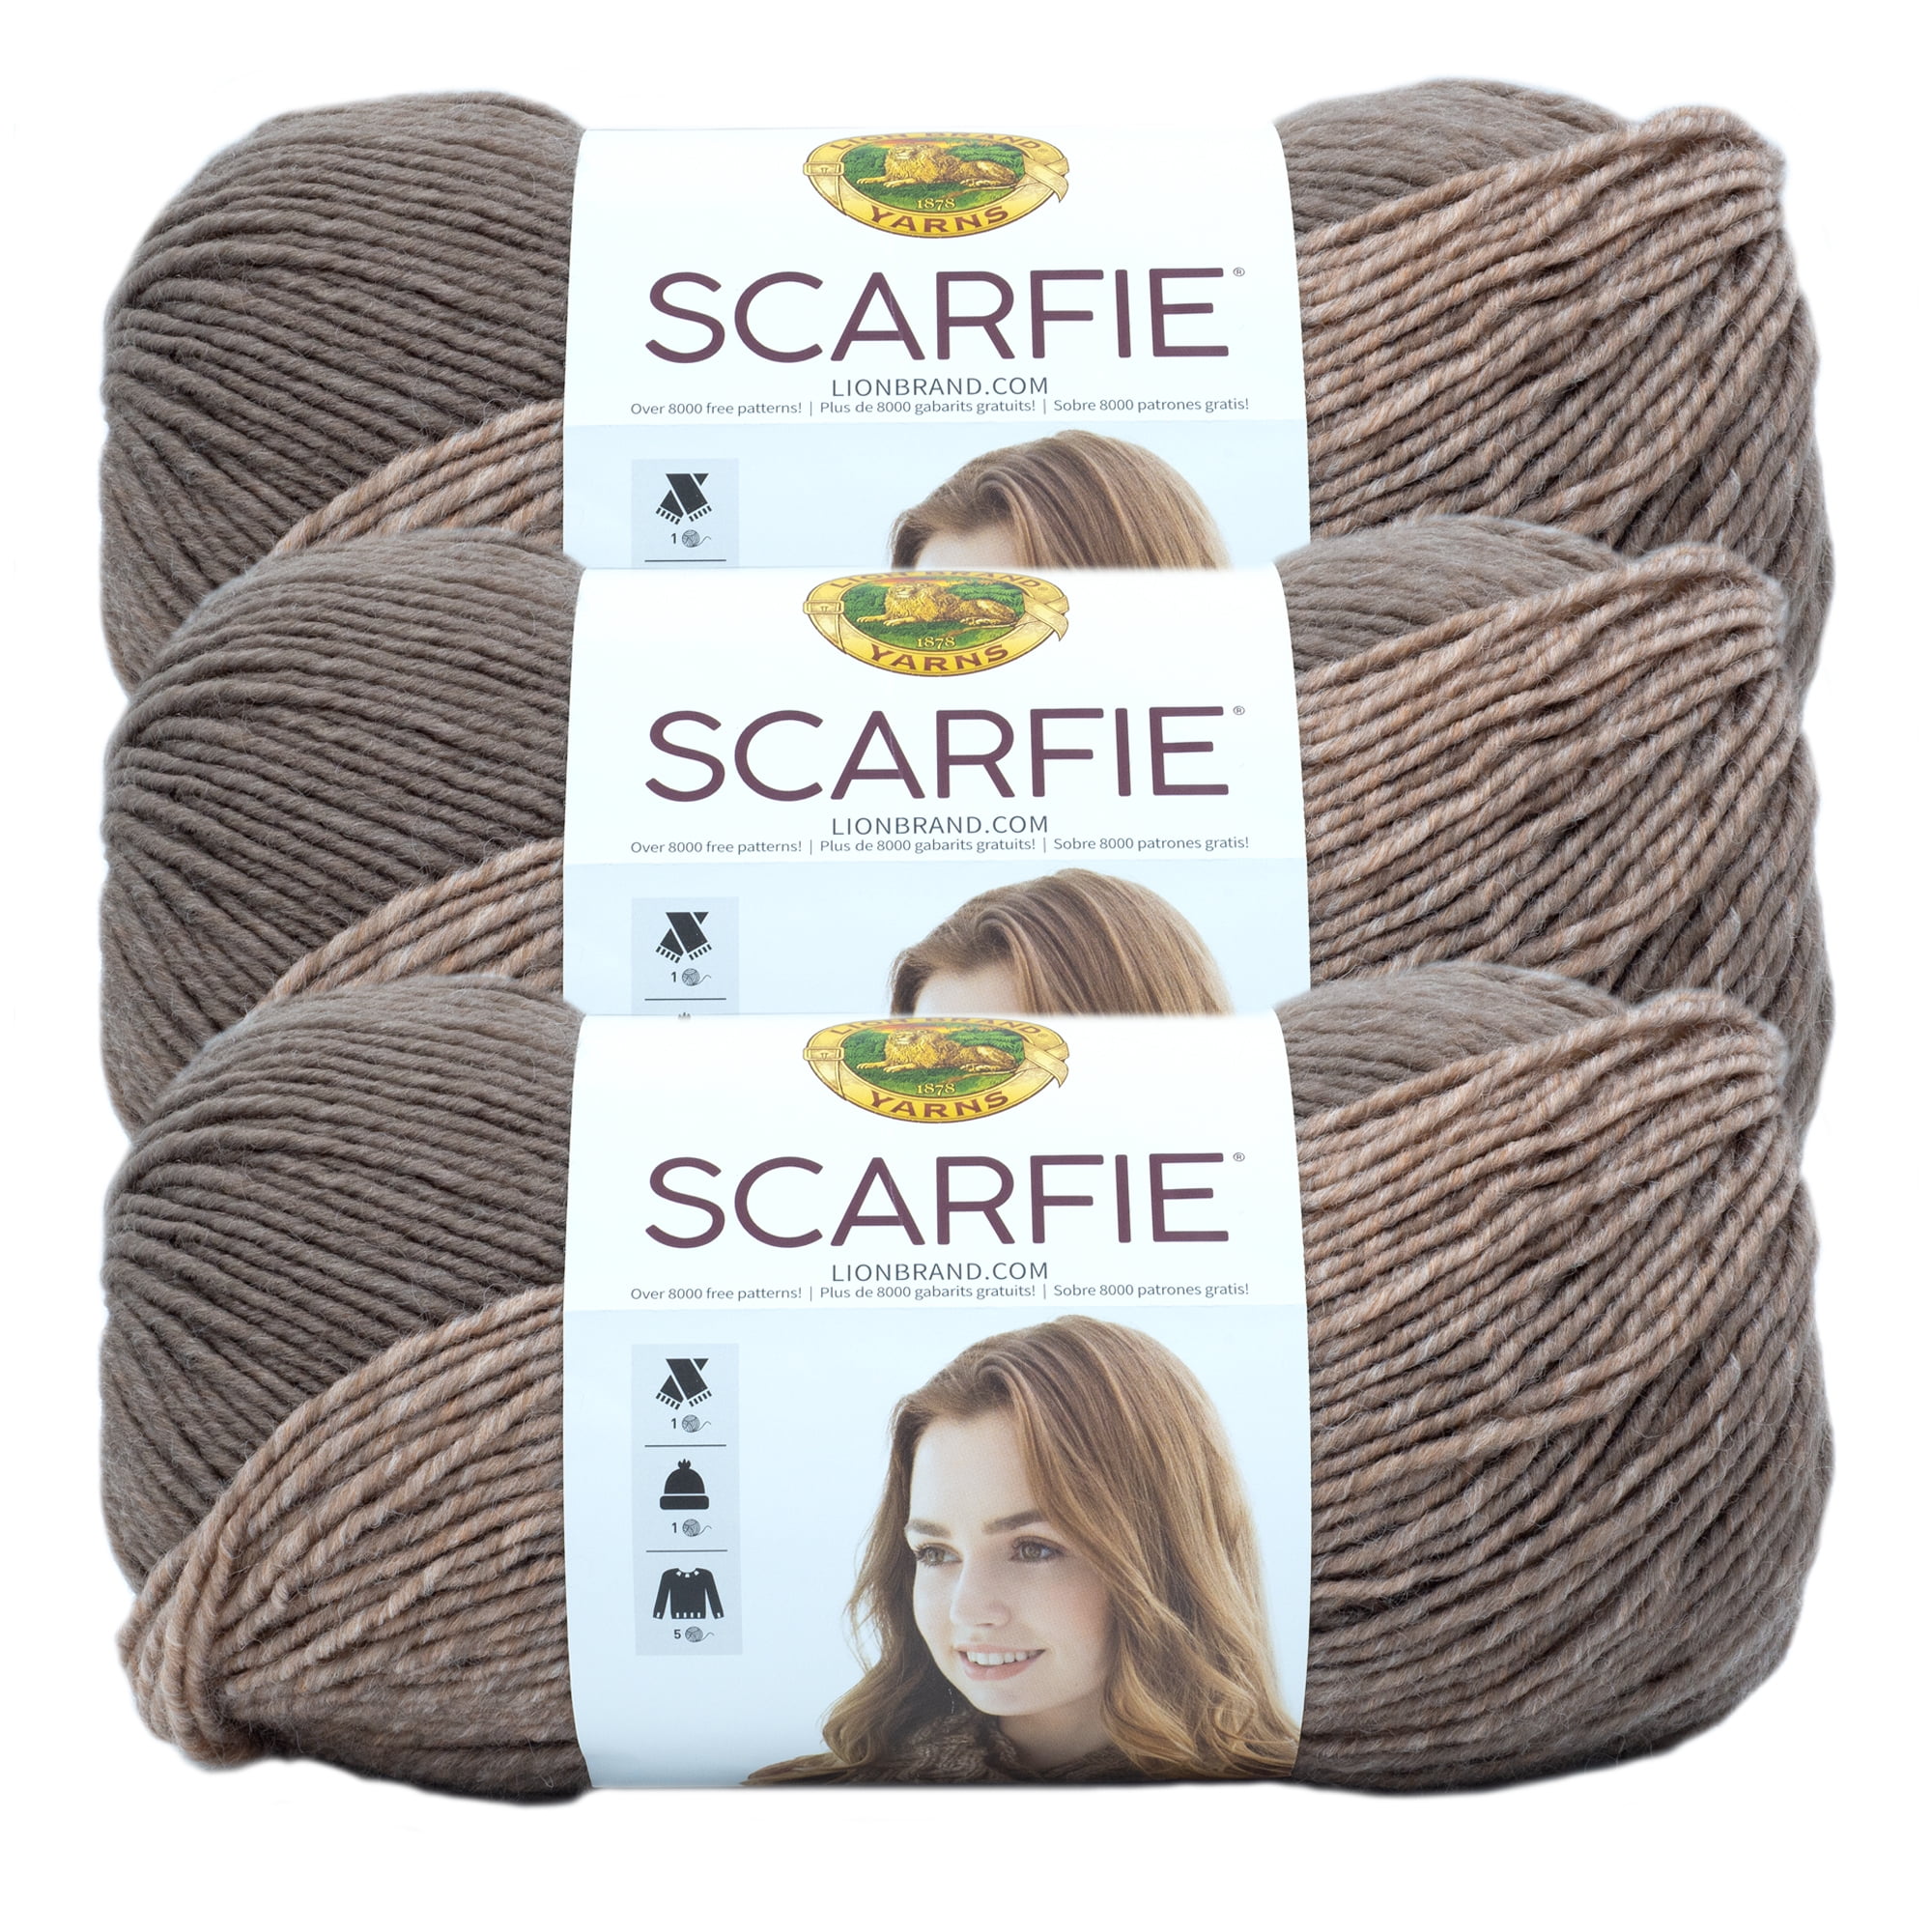 Lion Brand Knitting Yarn Scarfie Cream/Silver 3-Skein Factory Pack (Same  Dye Lot) 826-216 Bundle with 1 Artsiga Crafts Project Bag